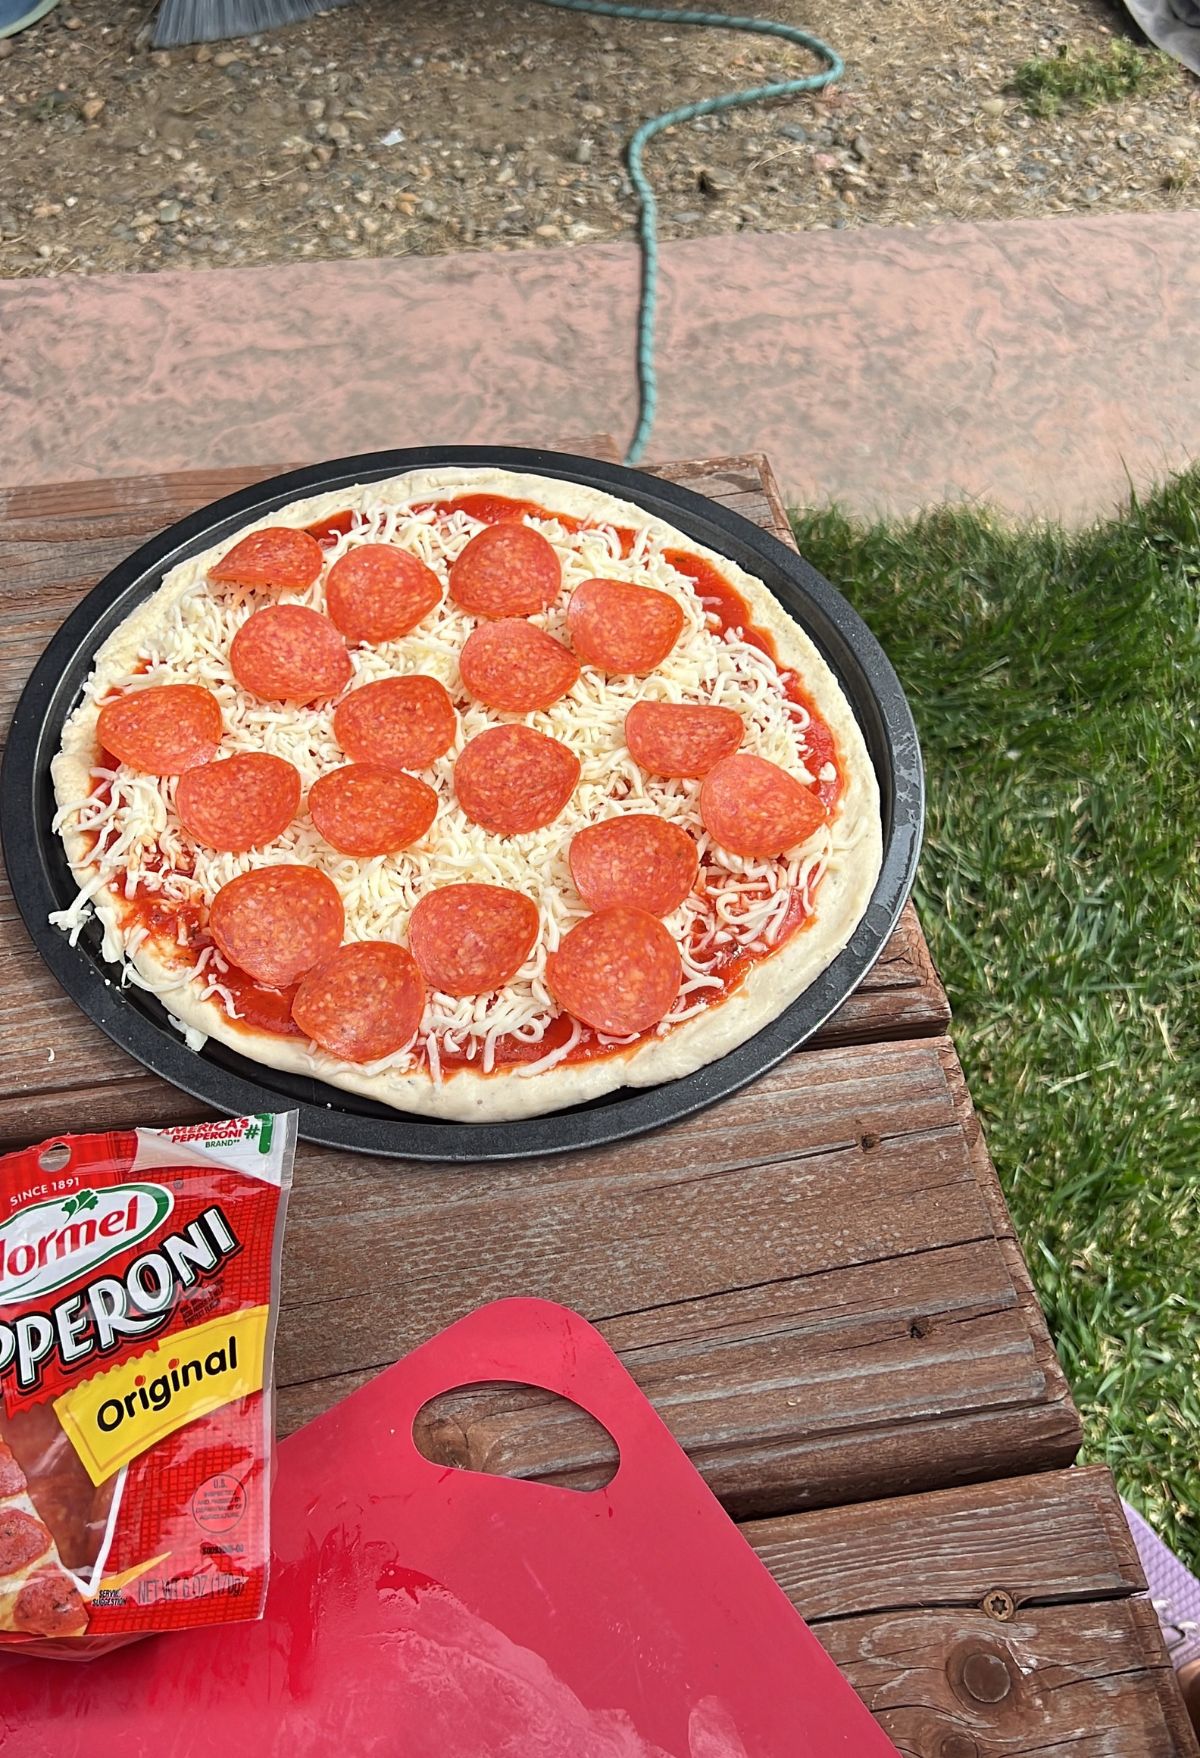 A pizza on a plate.